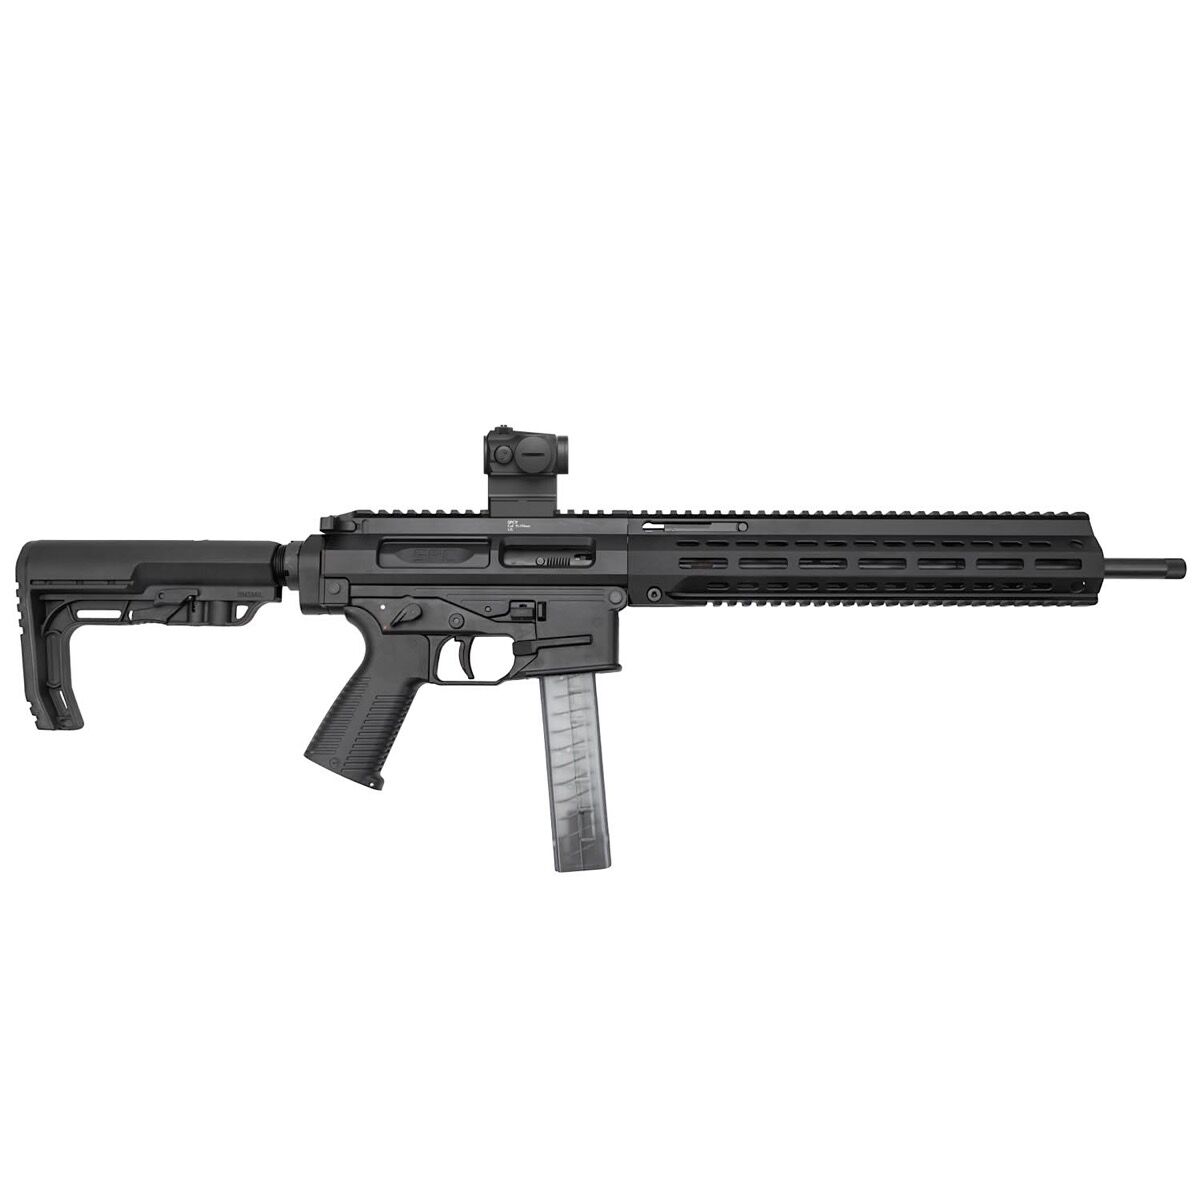 B&T SPC9 SPORT G CARBINE SA 9MM 477MM GLOCK COMPATIBLE LOWER 6-POS STOCK W/ AIMPOINT MICRO T1